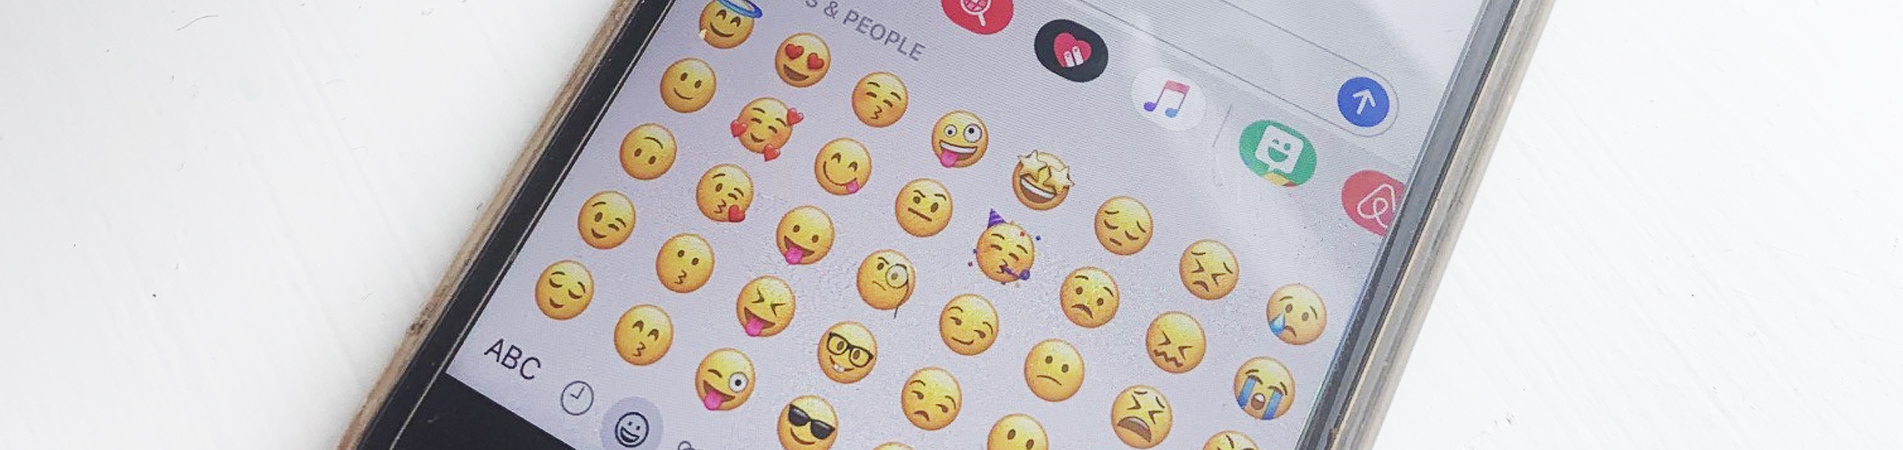 World Emoji Day: five facts you may not know about emojis